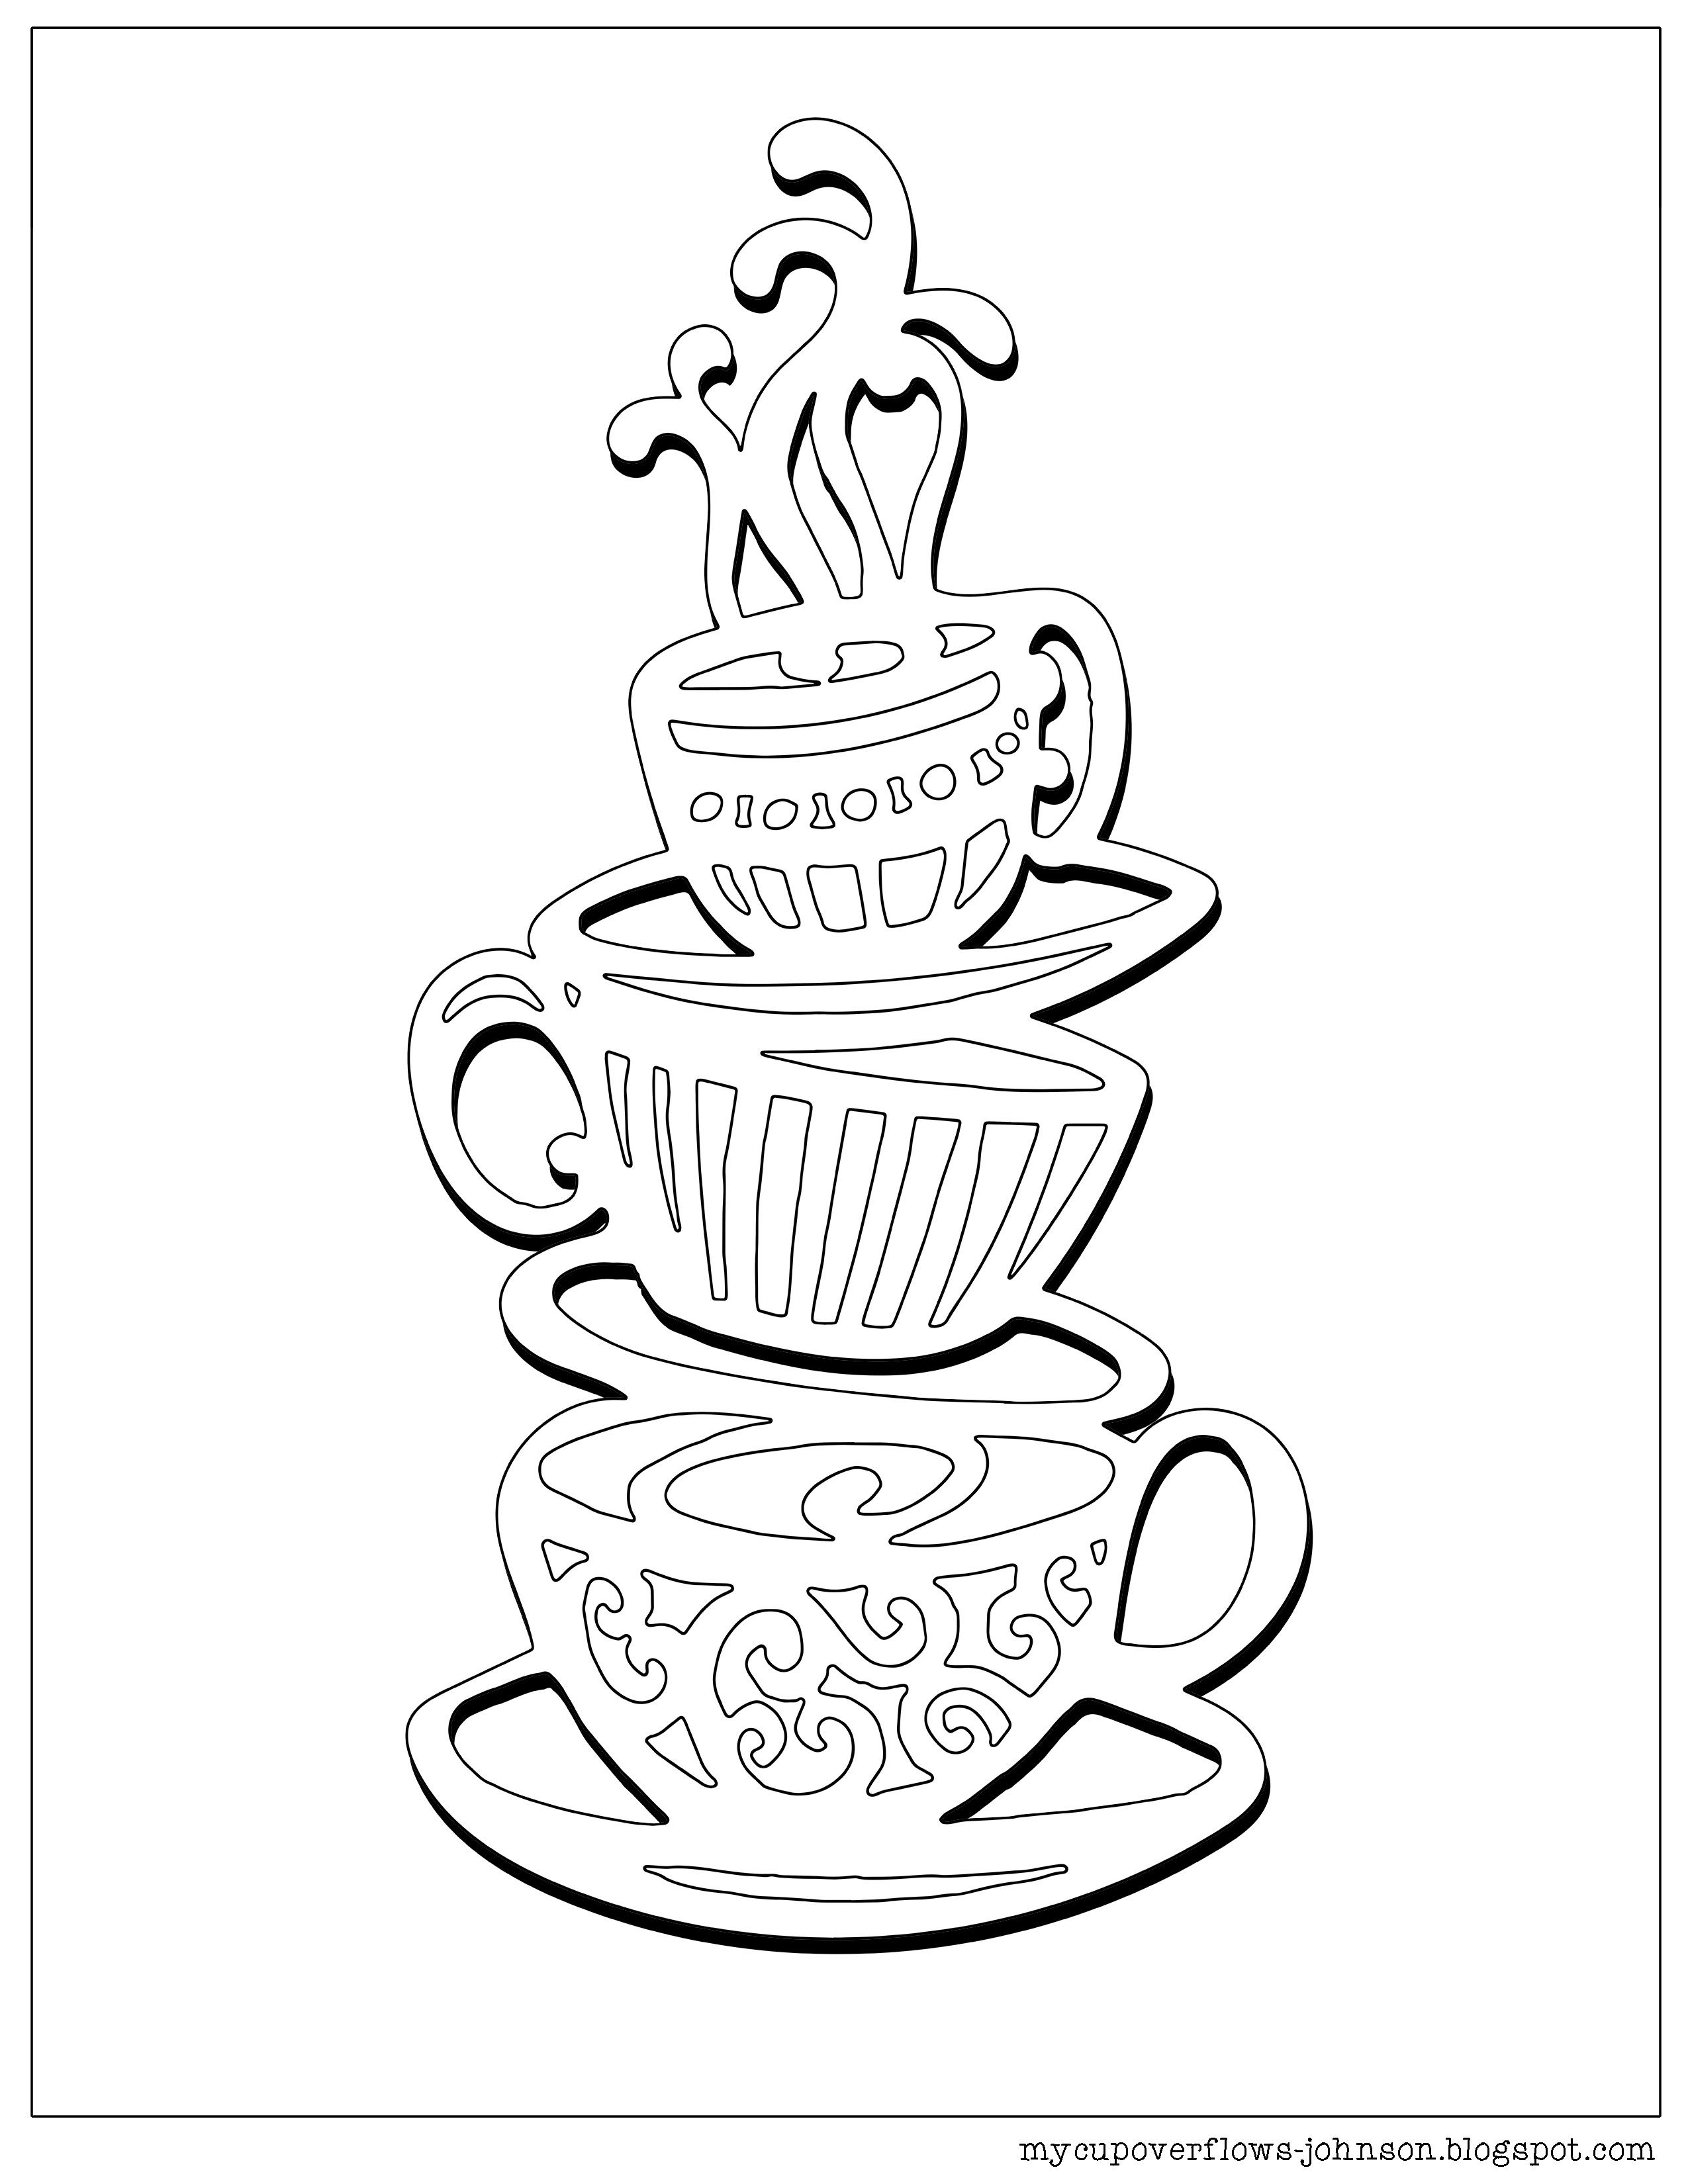 Tea and Coffee | Coloring pages, New year coloring pages, Coloring pages  for boys